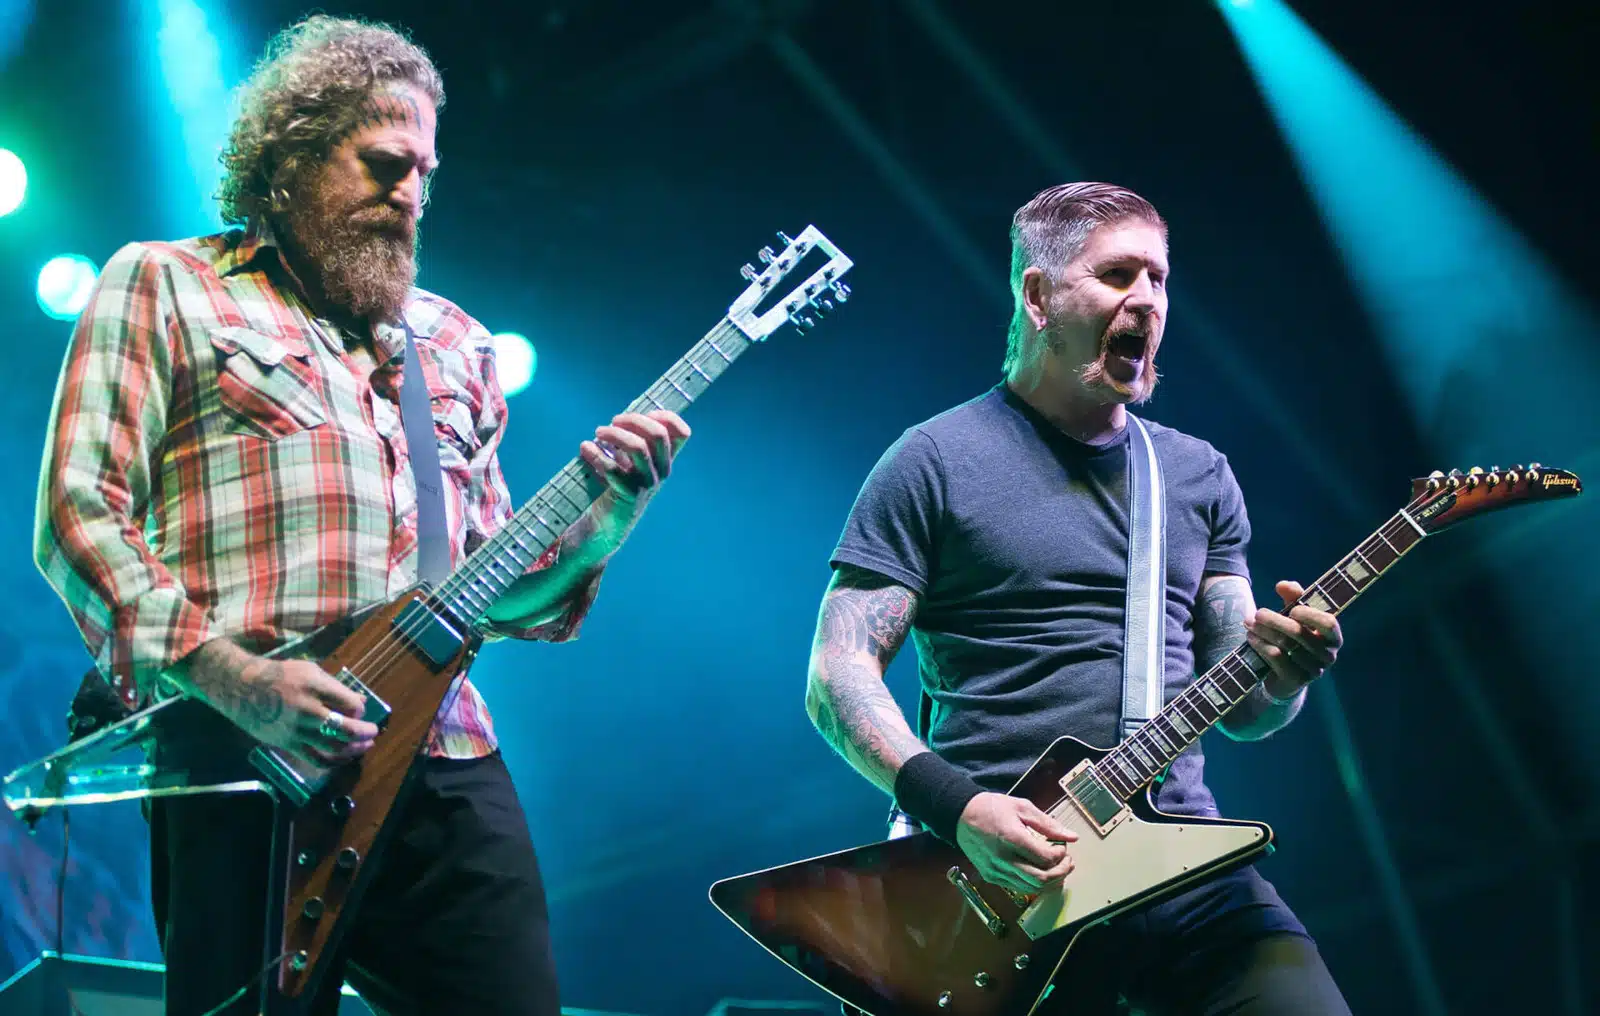 Bill Kelliher and Brent Hinds Name Their Top Heaviest Mastodon Riffs